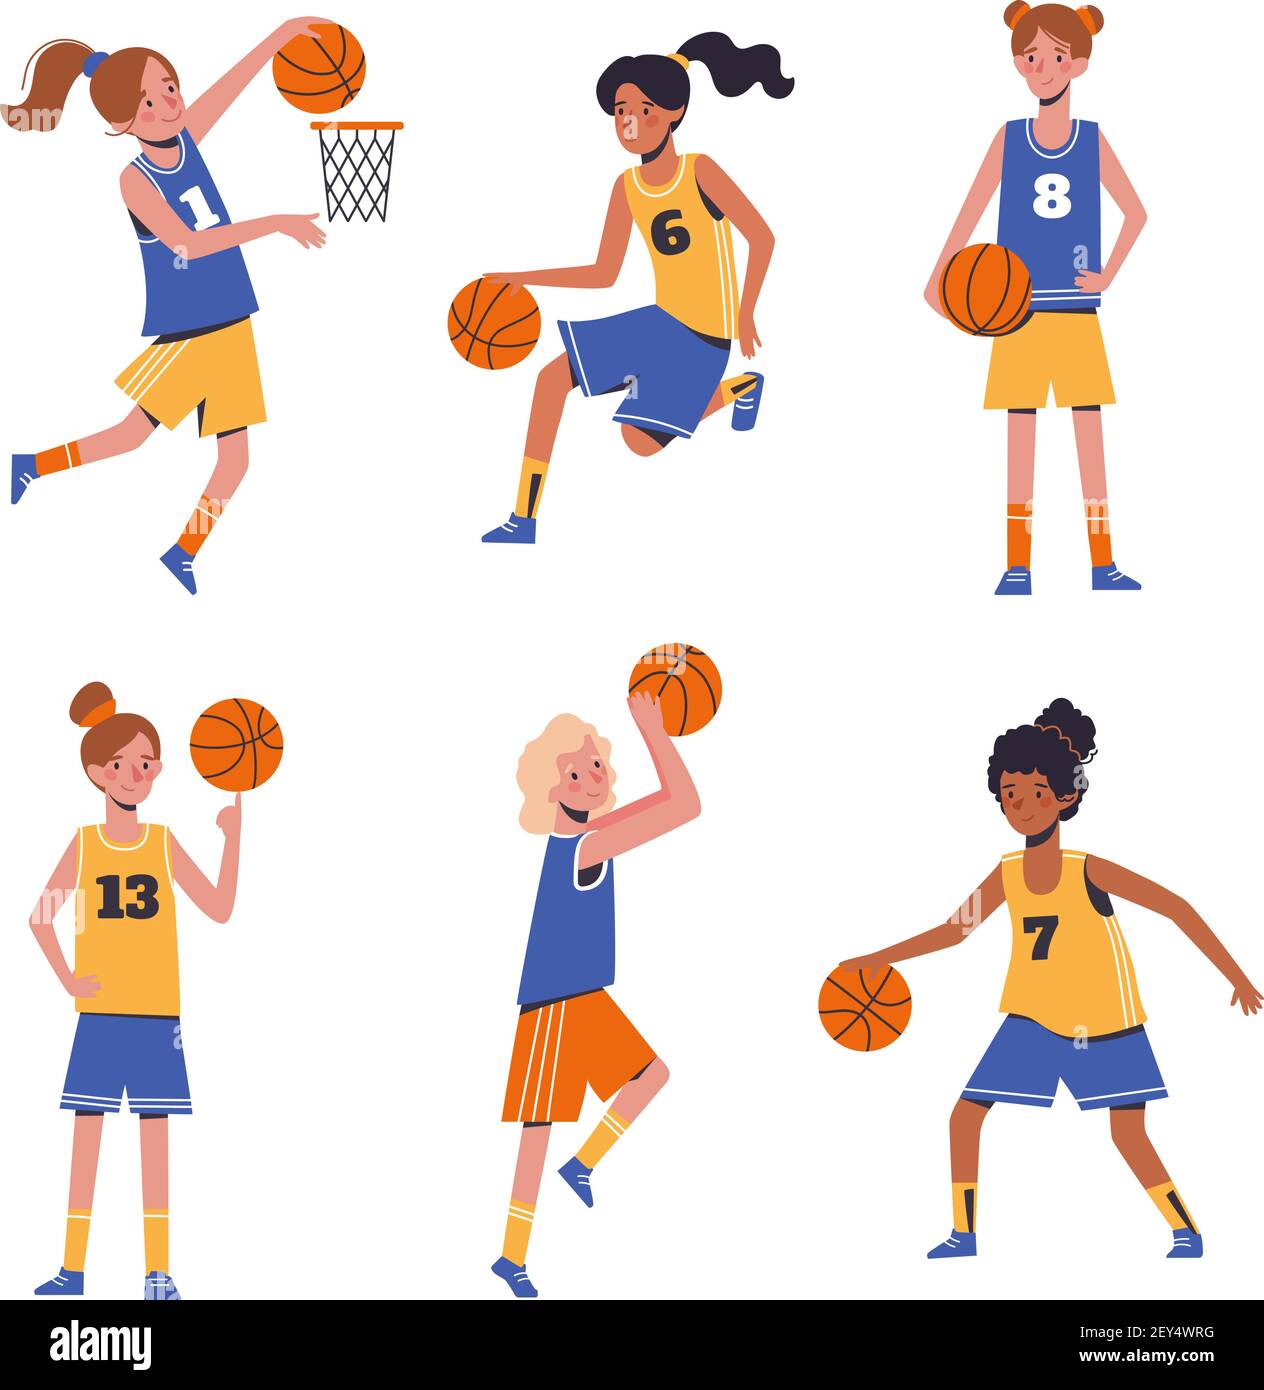 Childrens sports basketball. Flat design concept with funny kids playing ball. Vector illustration of girls, set isolated on white background Stock Vector